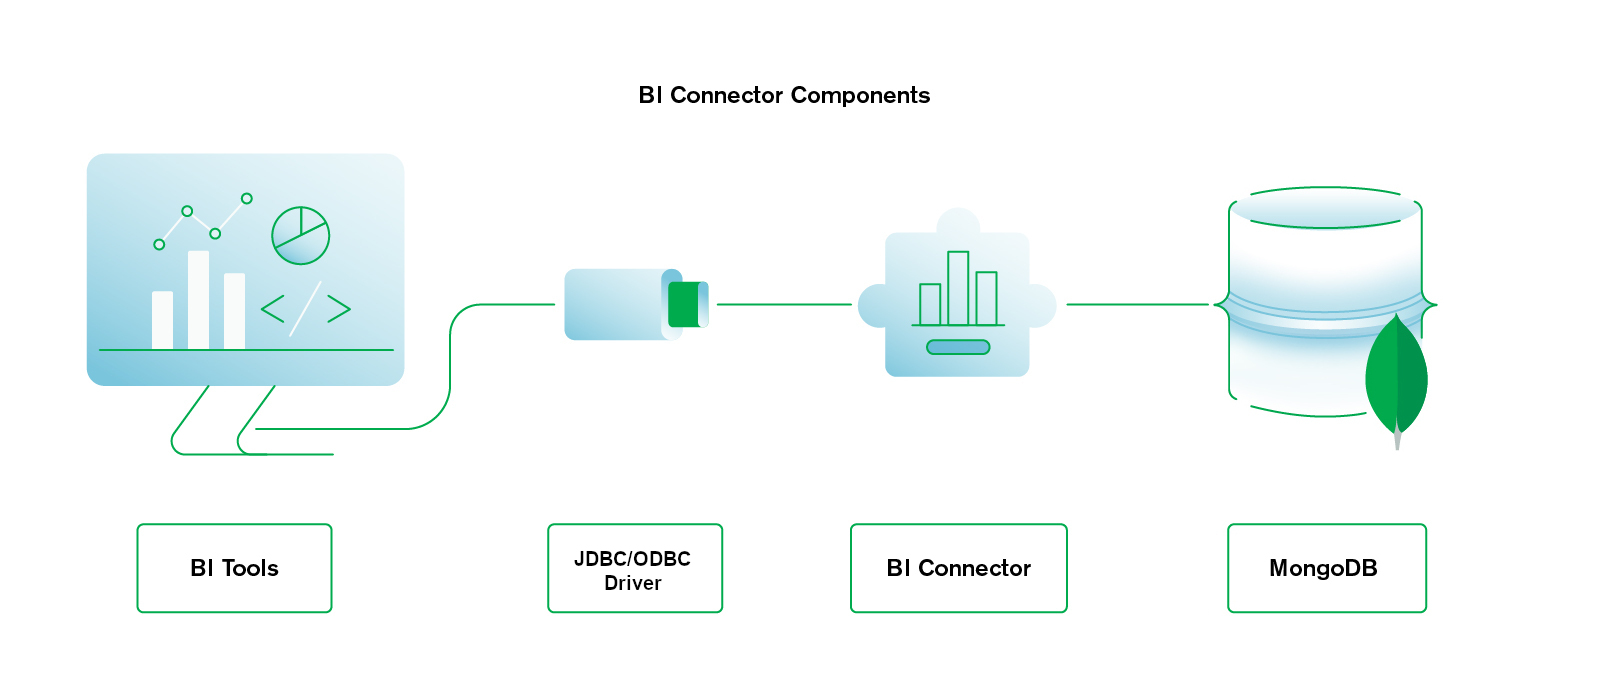 Diagram showing that other BI tools communicate with the DSN, which communicates with MongoDB's BI Connector, which in turn communicates with the MongoDB database.